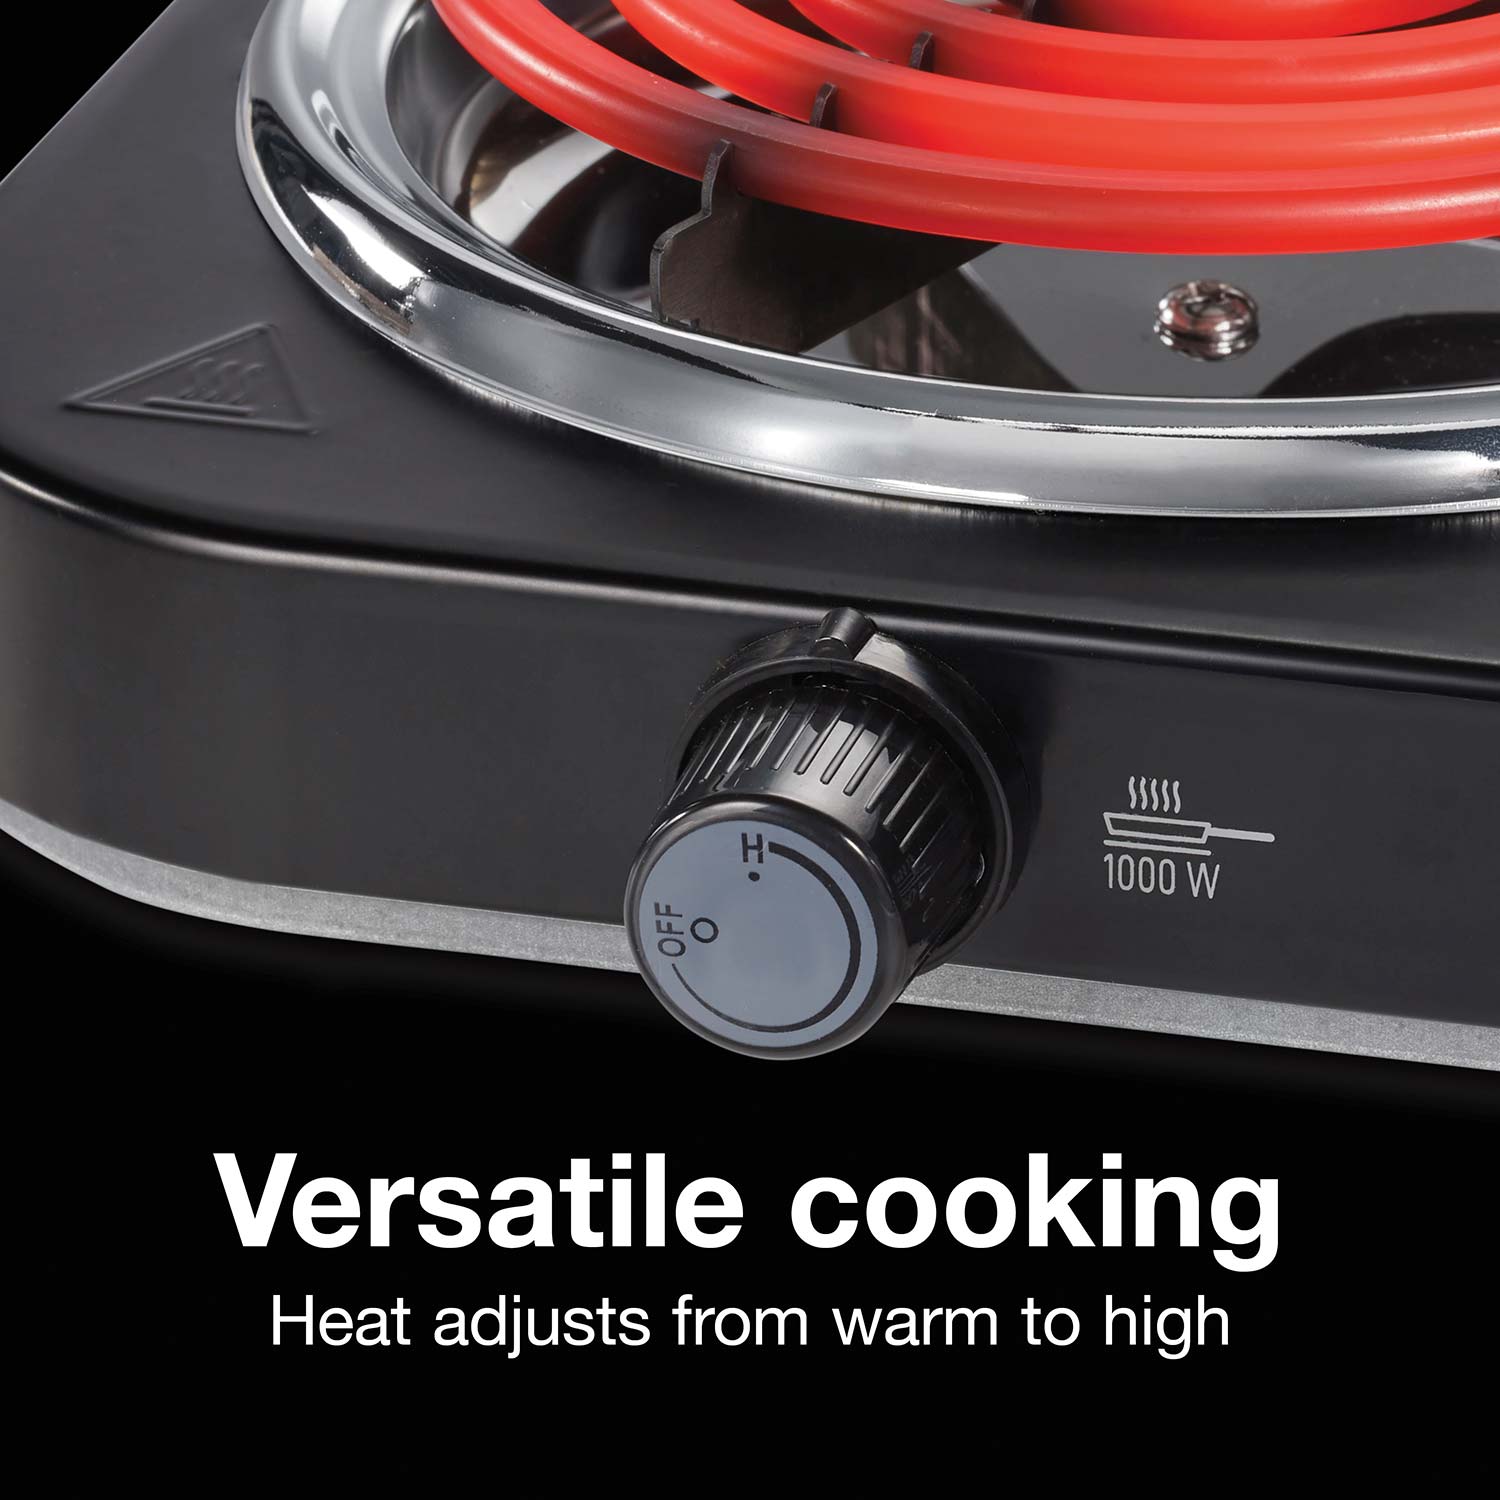 Portable Small Electric Stove Burner Hot Plate for Home Coffee Tea Water  Heater